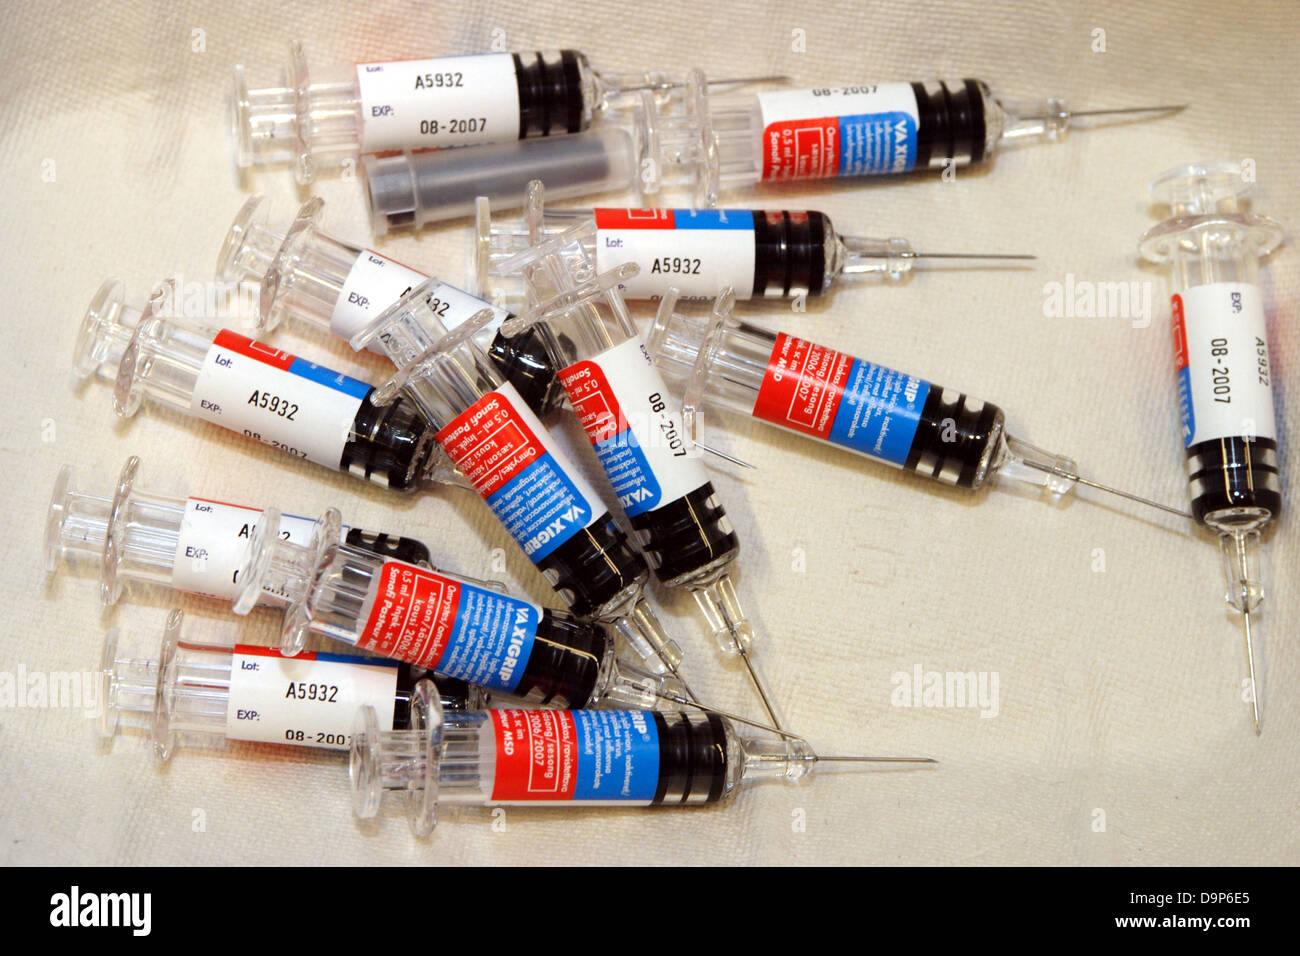 Vaccination syringes in a bowl Stock Photo